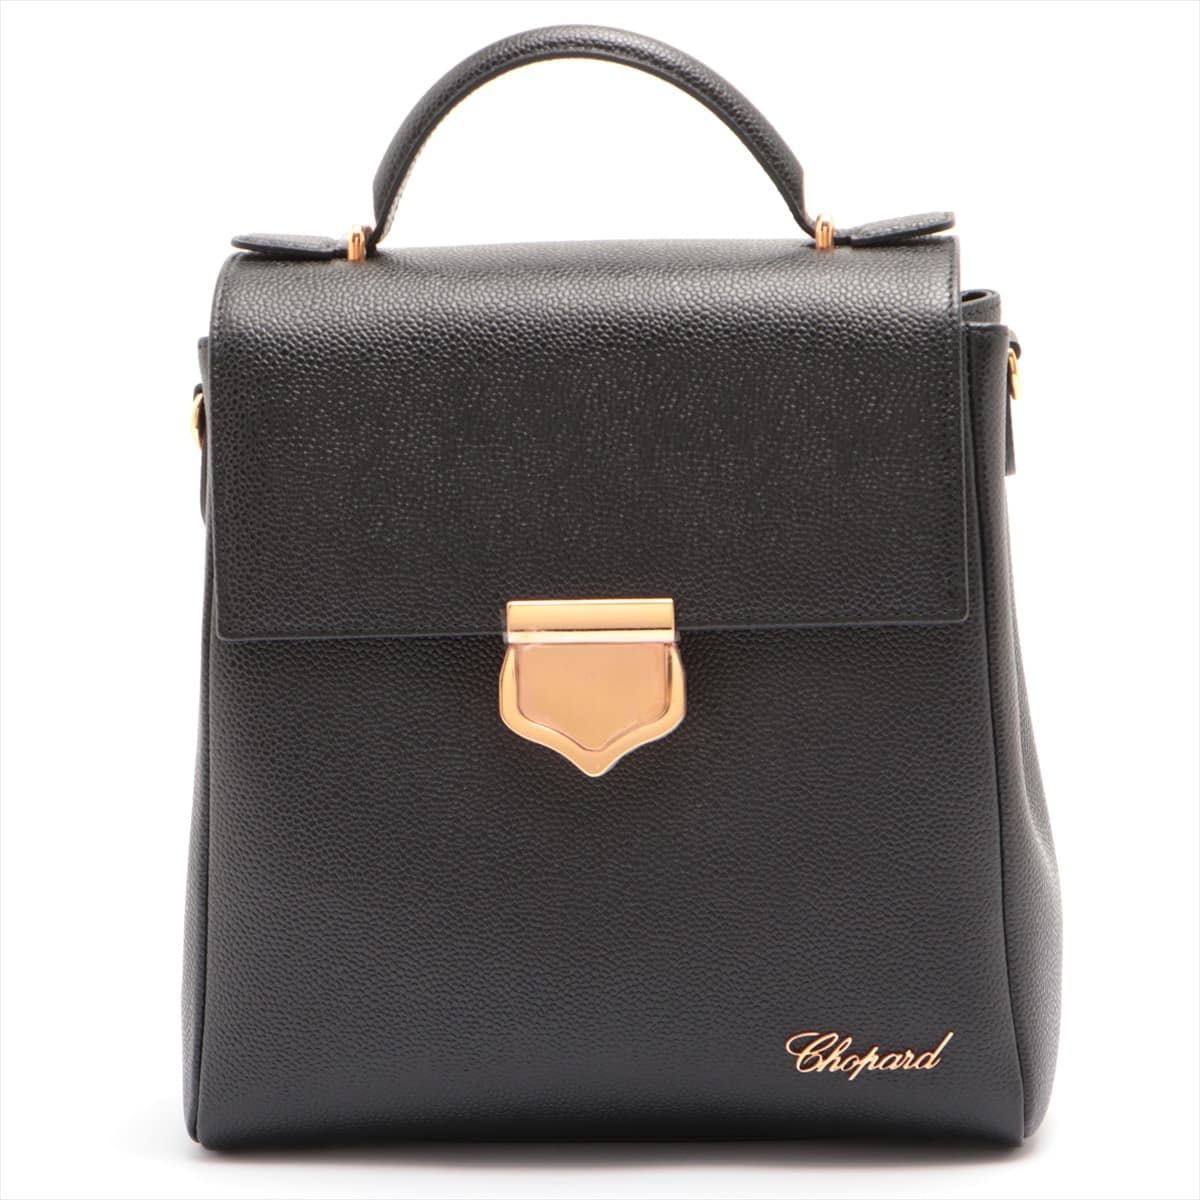 Chopard Imperial Leather Backpack Black